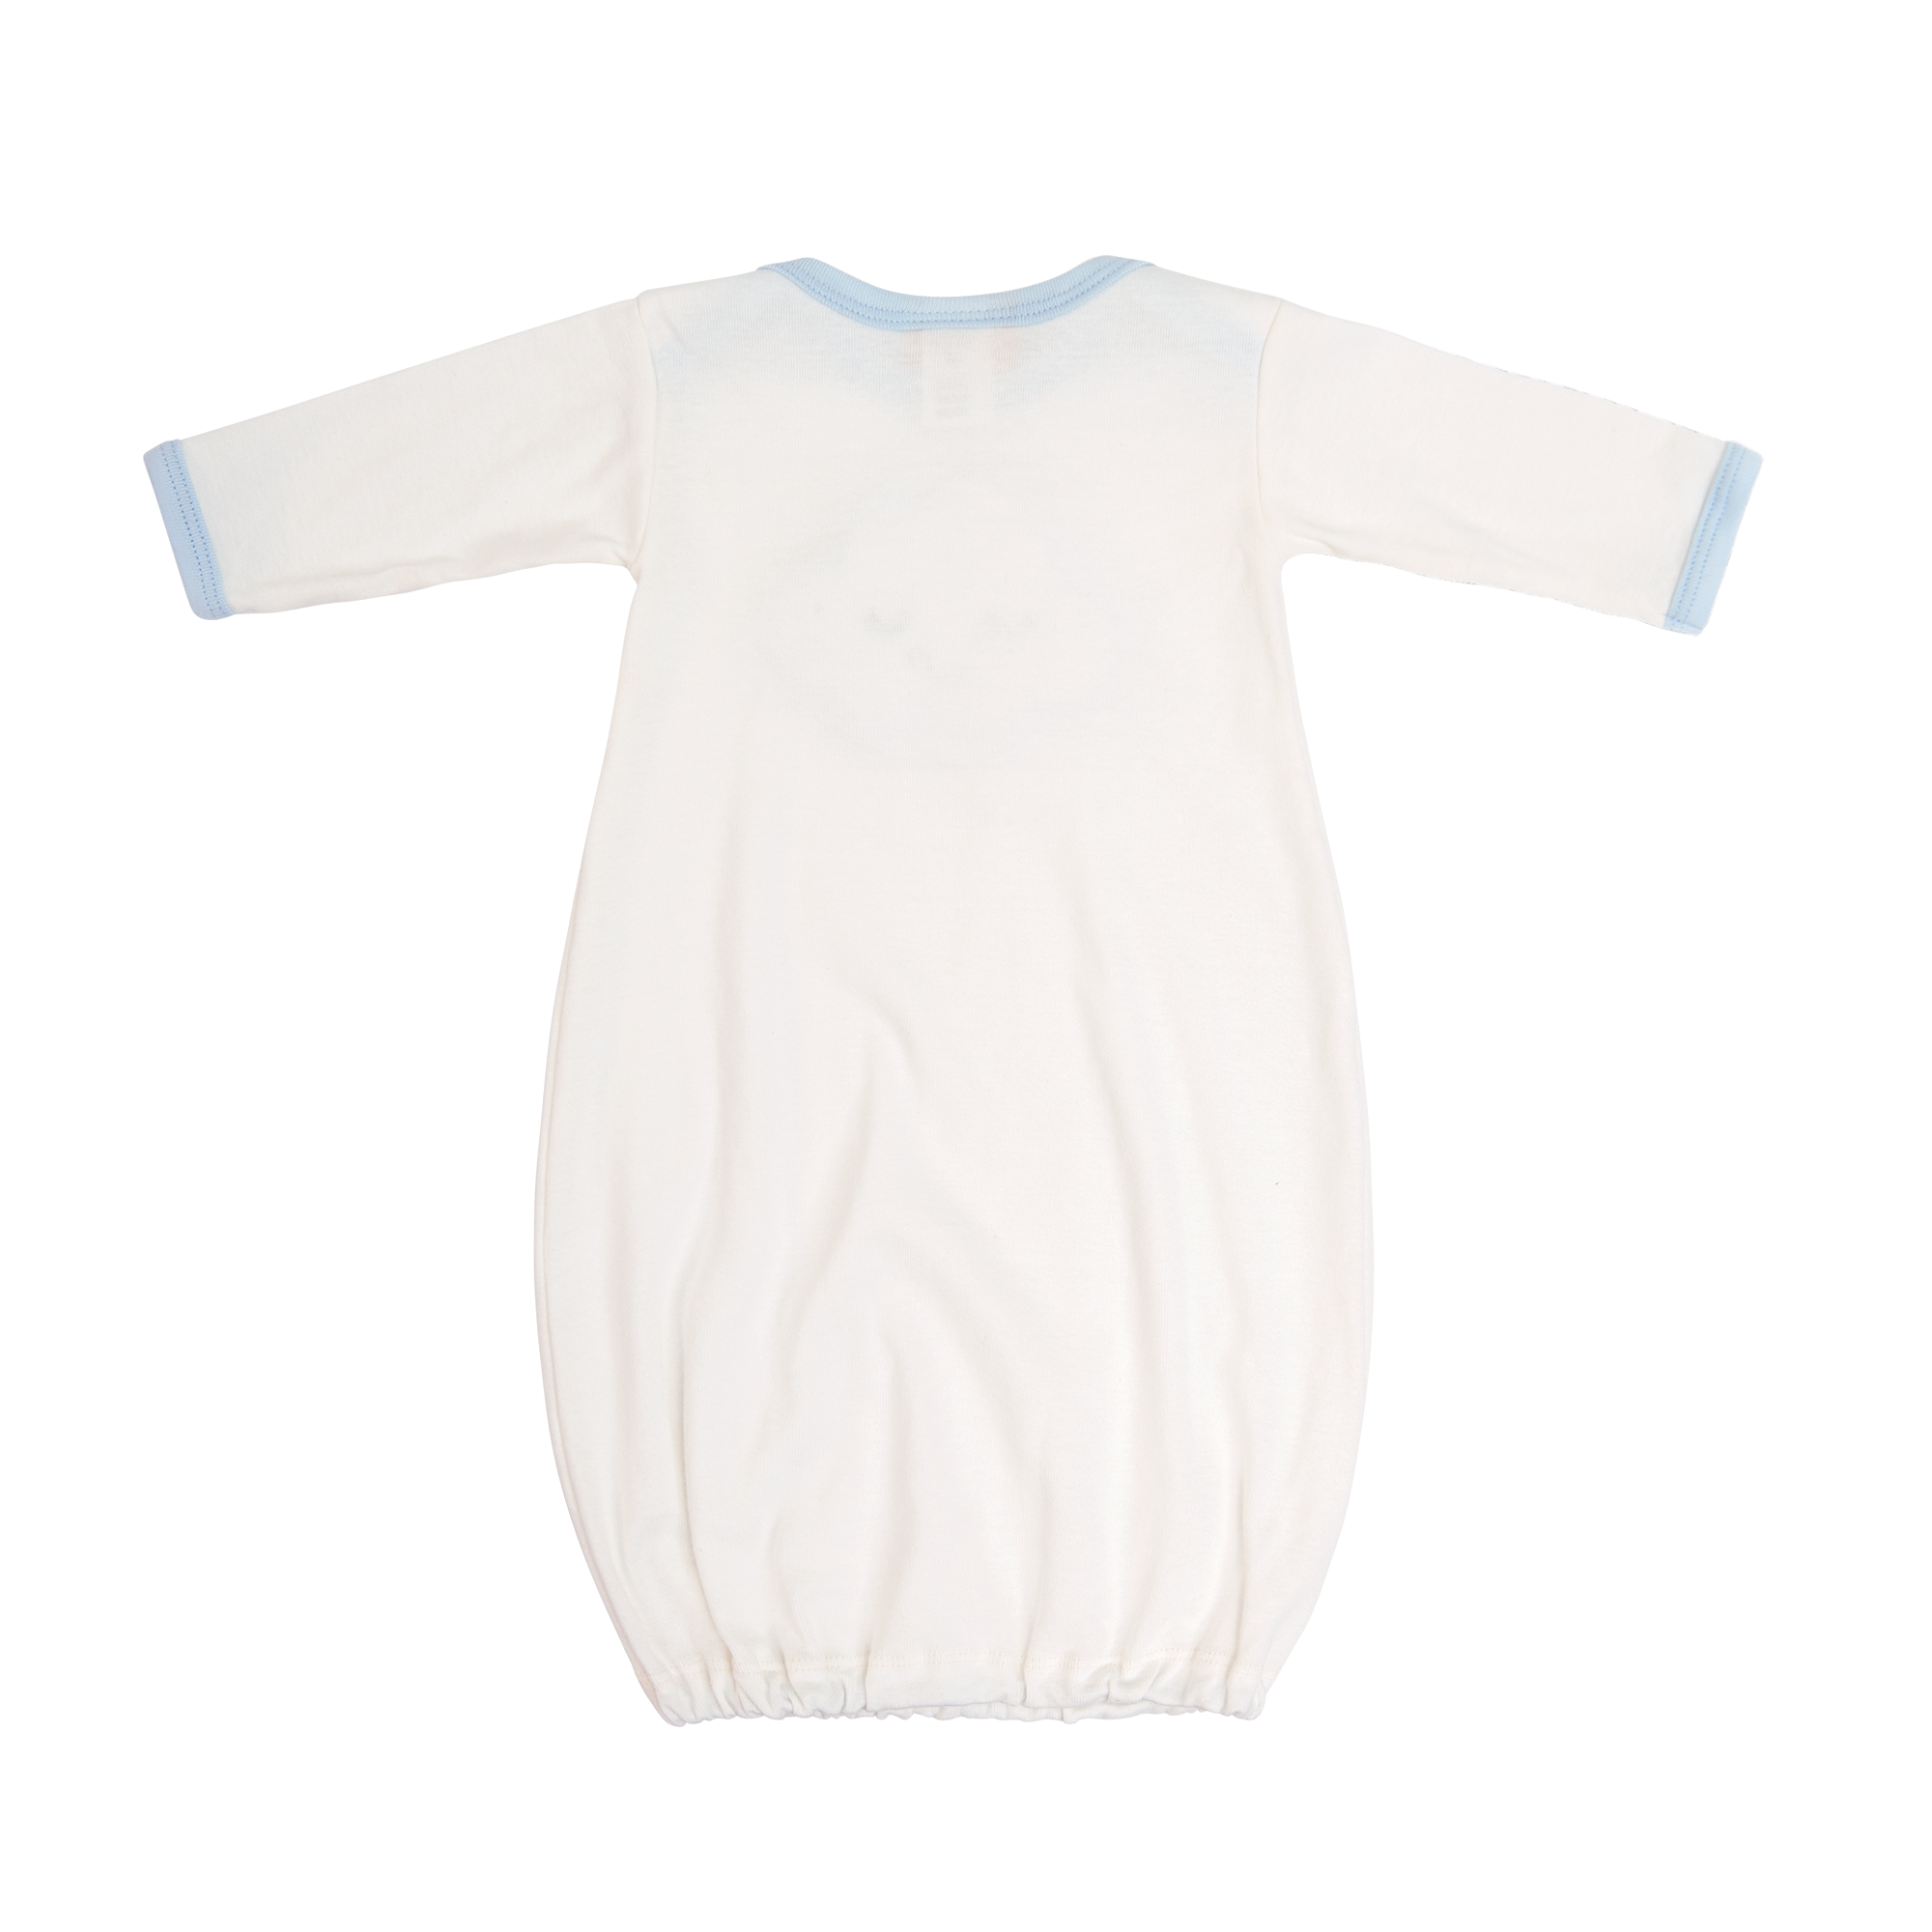 Baby's Sleepy Time Home Gown